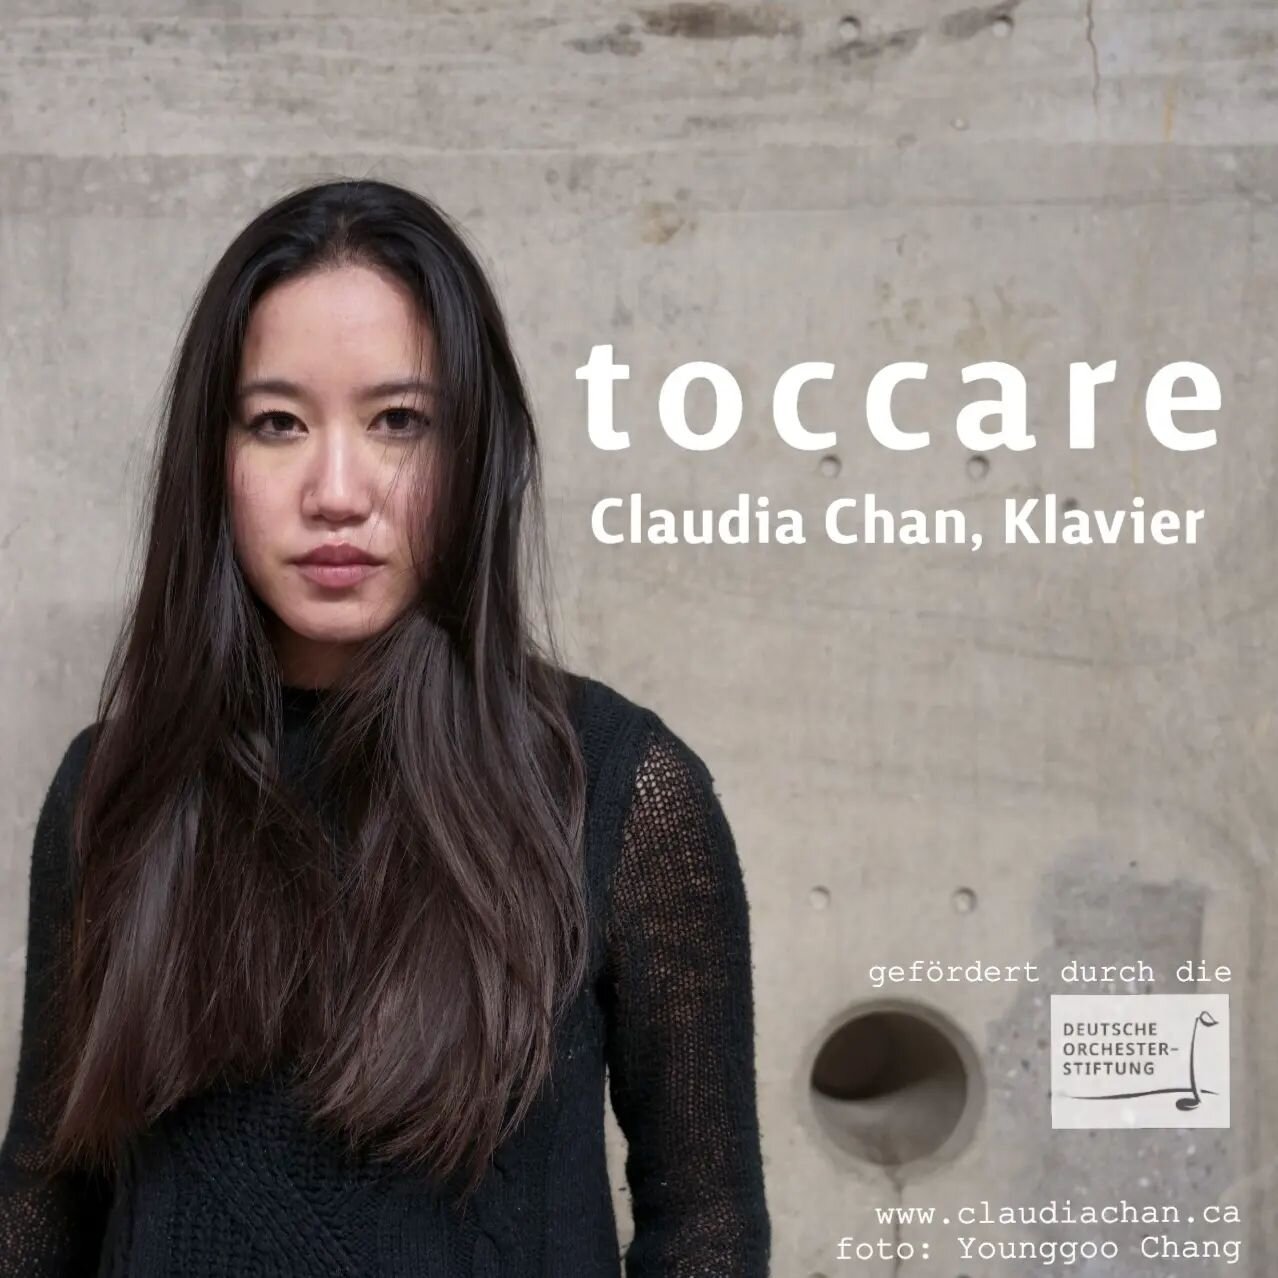 next week i will be premiering my new solo programme &quot;toccare&quot; (which i am really proud of!) - a peek into some fascinating music by italian composers, including world premieres of works by francesco filidei, german premieres by giulia loru